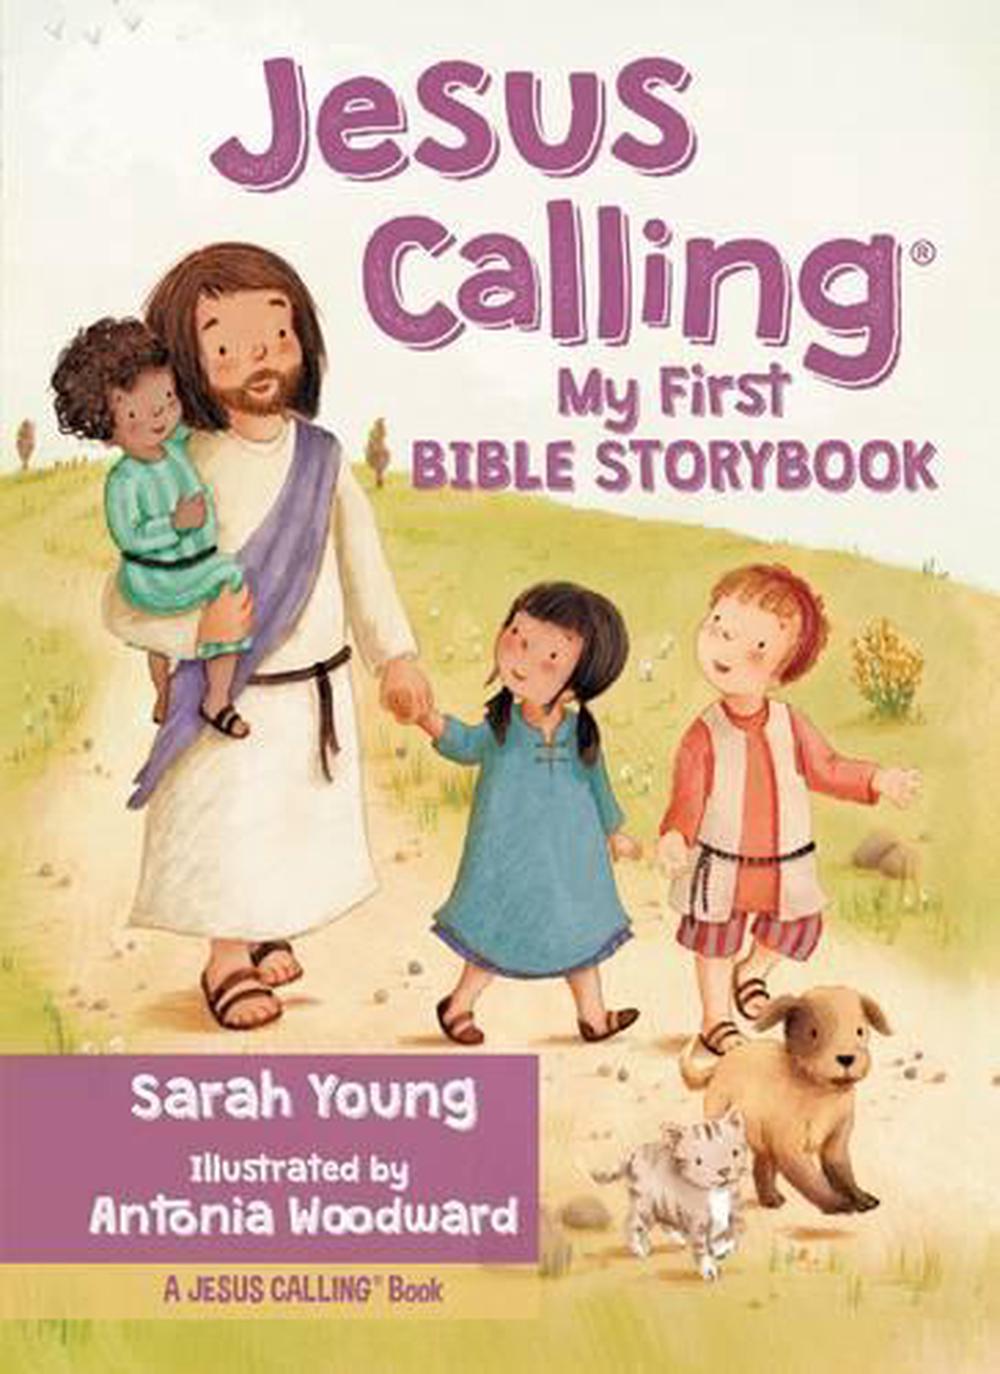 Jesus Calling My First Bible Storybook by Sarah Young